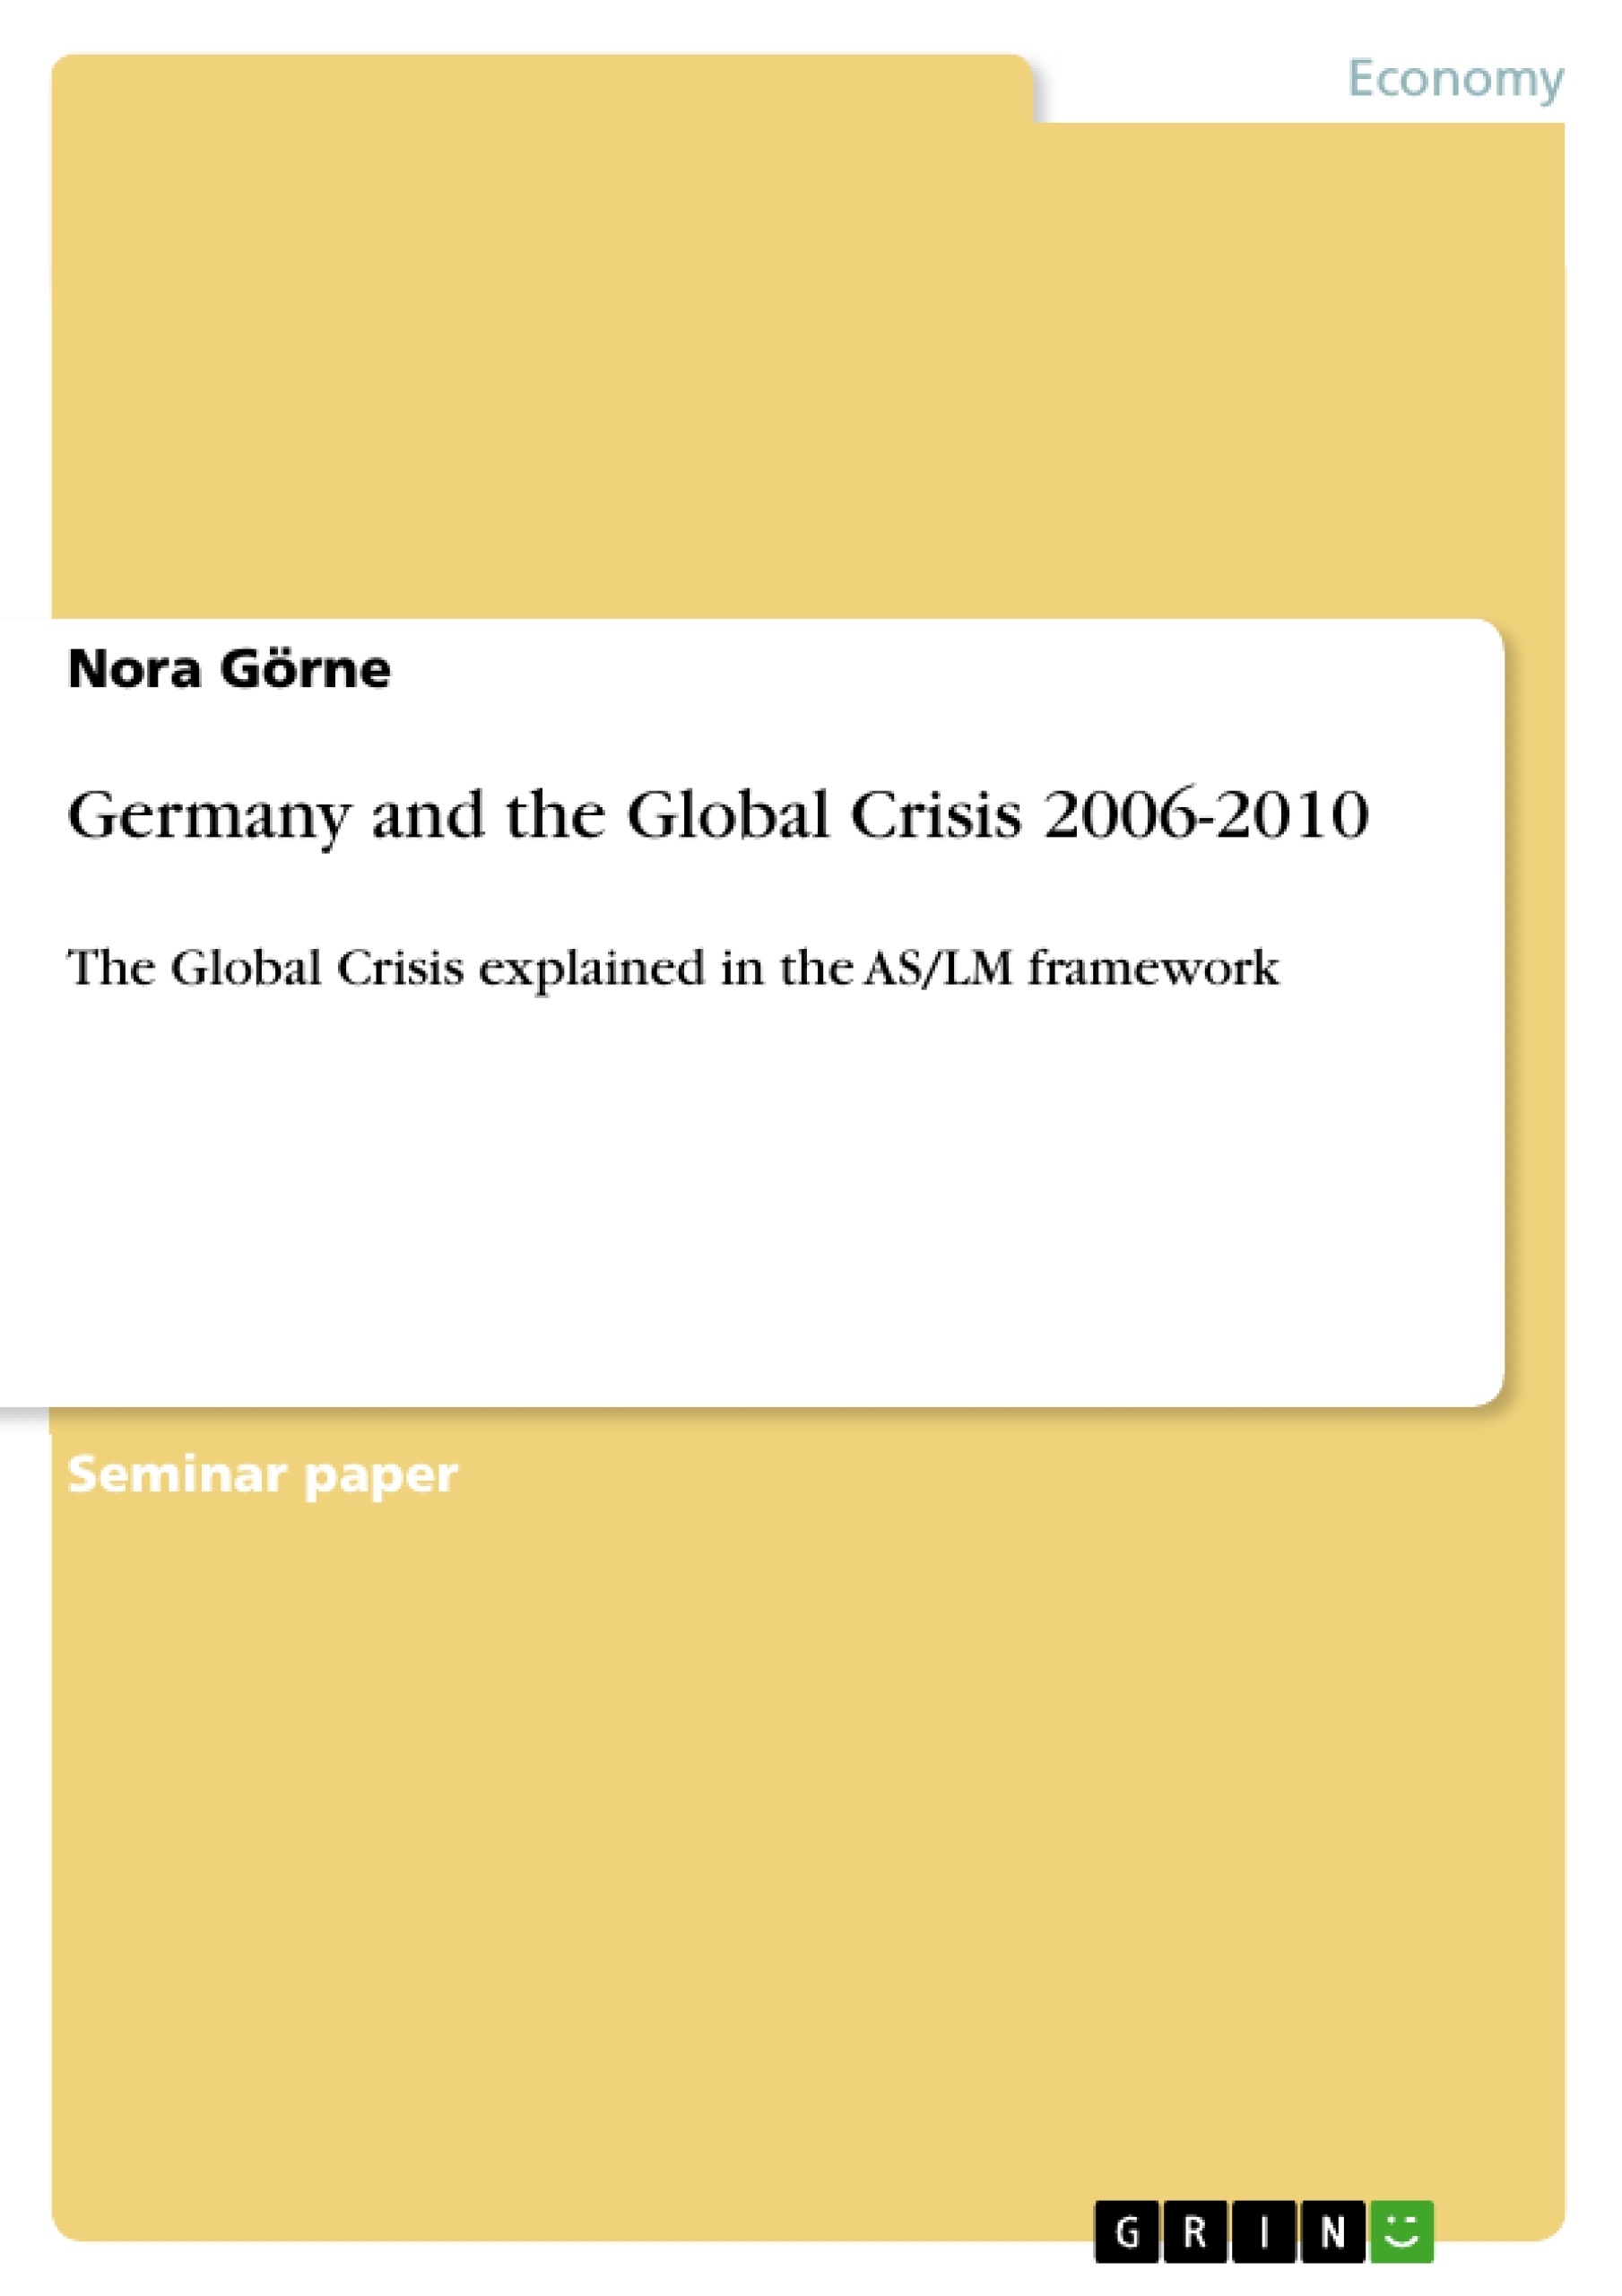 Title: Germany and the Global Crisis 2006-2010